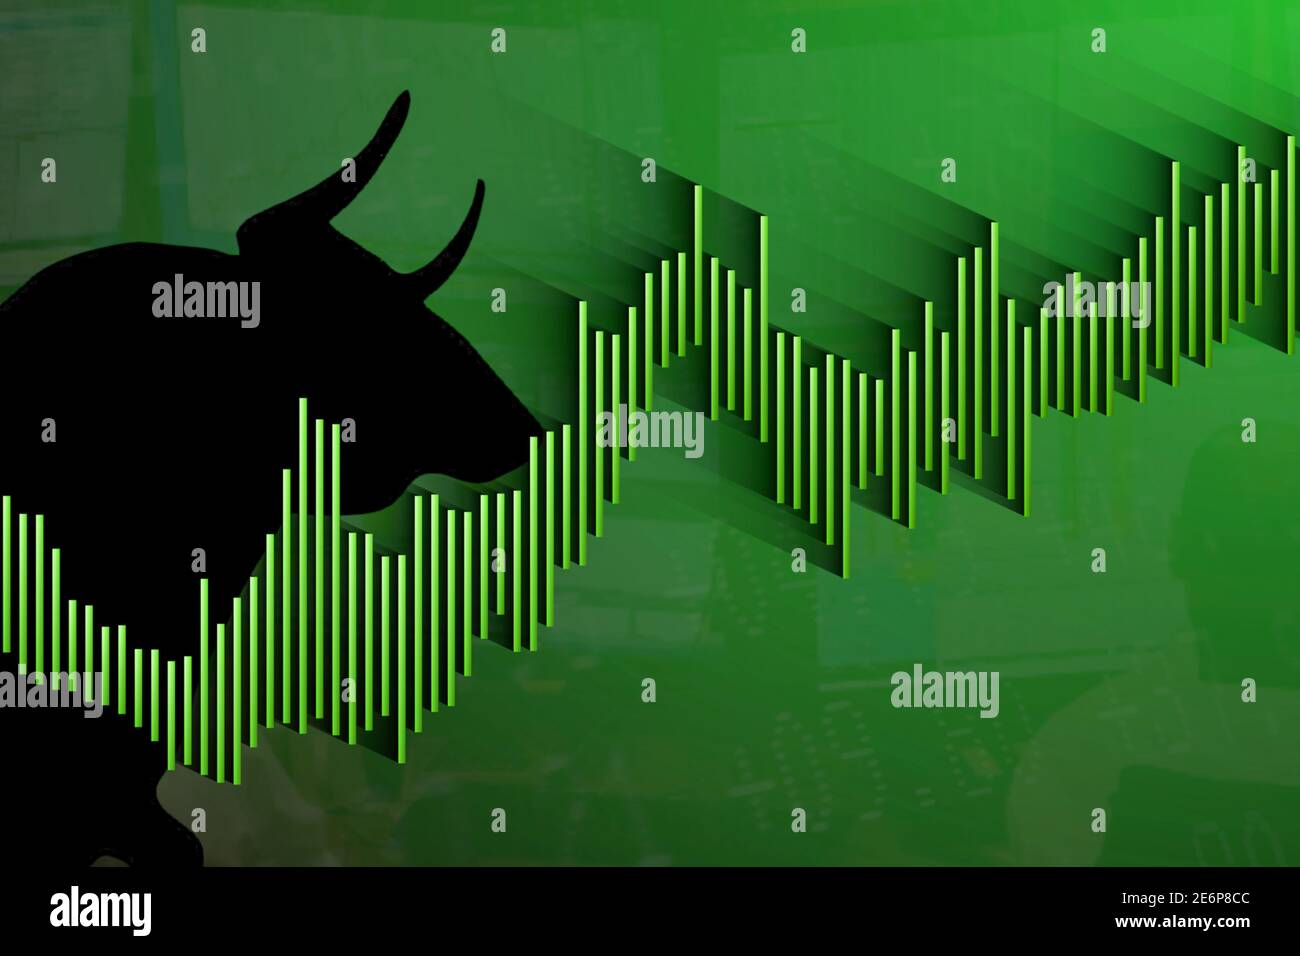 A bullish stock market with a green background. The green bar chart with a black silhouette of a bull with horns pointing to the ascending chart shows... Stock Photo